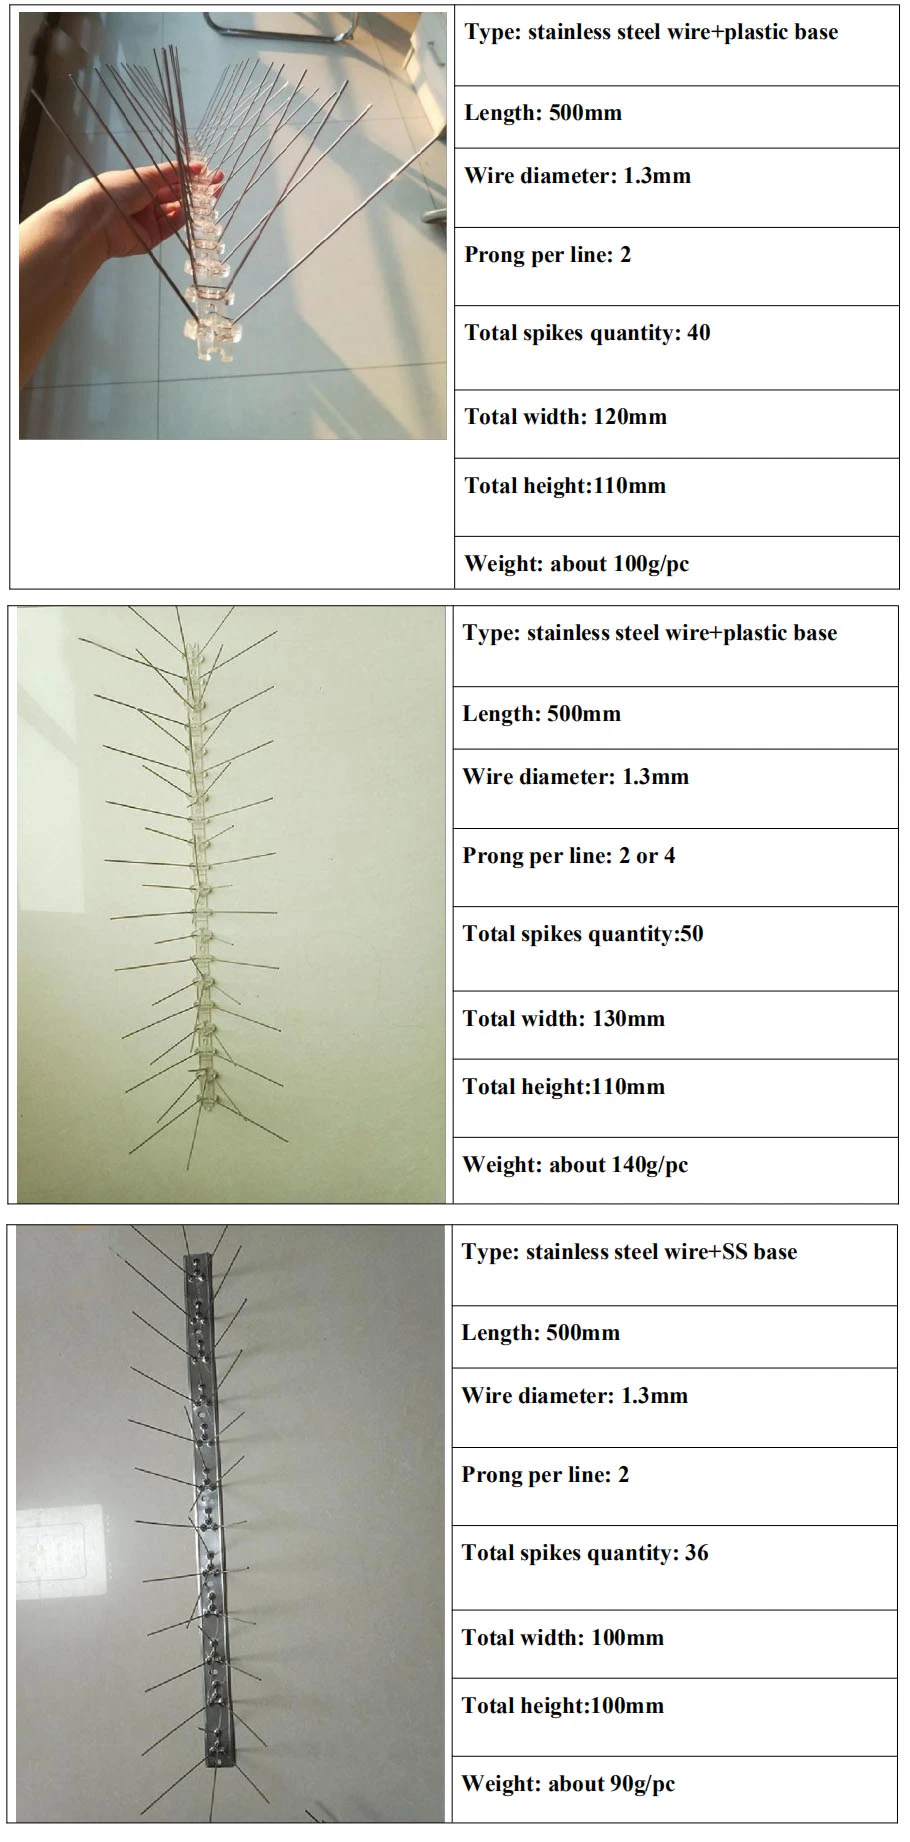 Hot Sale and Good Price Anti Pigeon Bird Spikes Made in China